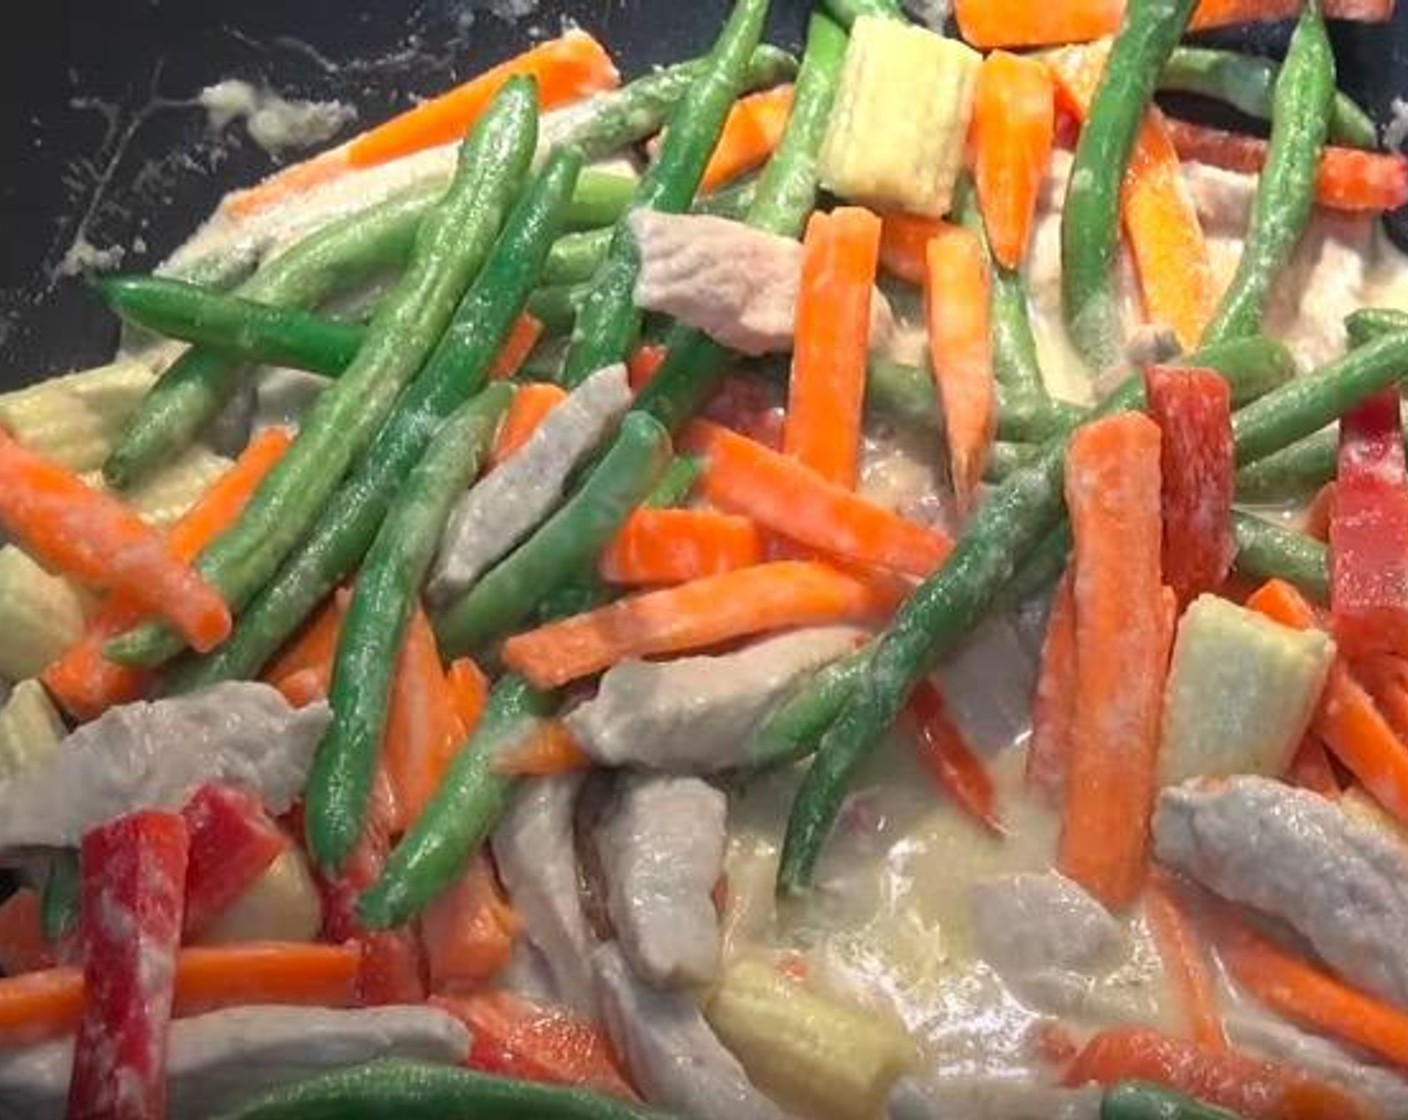 step 3 Add Mixed Vegetables (5 cups) and stir in. Cover the wok and allow to simmer for 5 minutes, or until vegetables are tender.